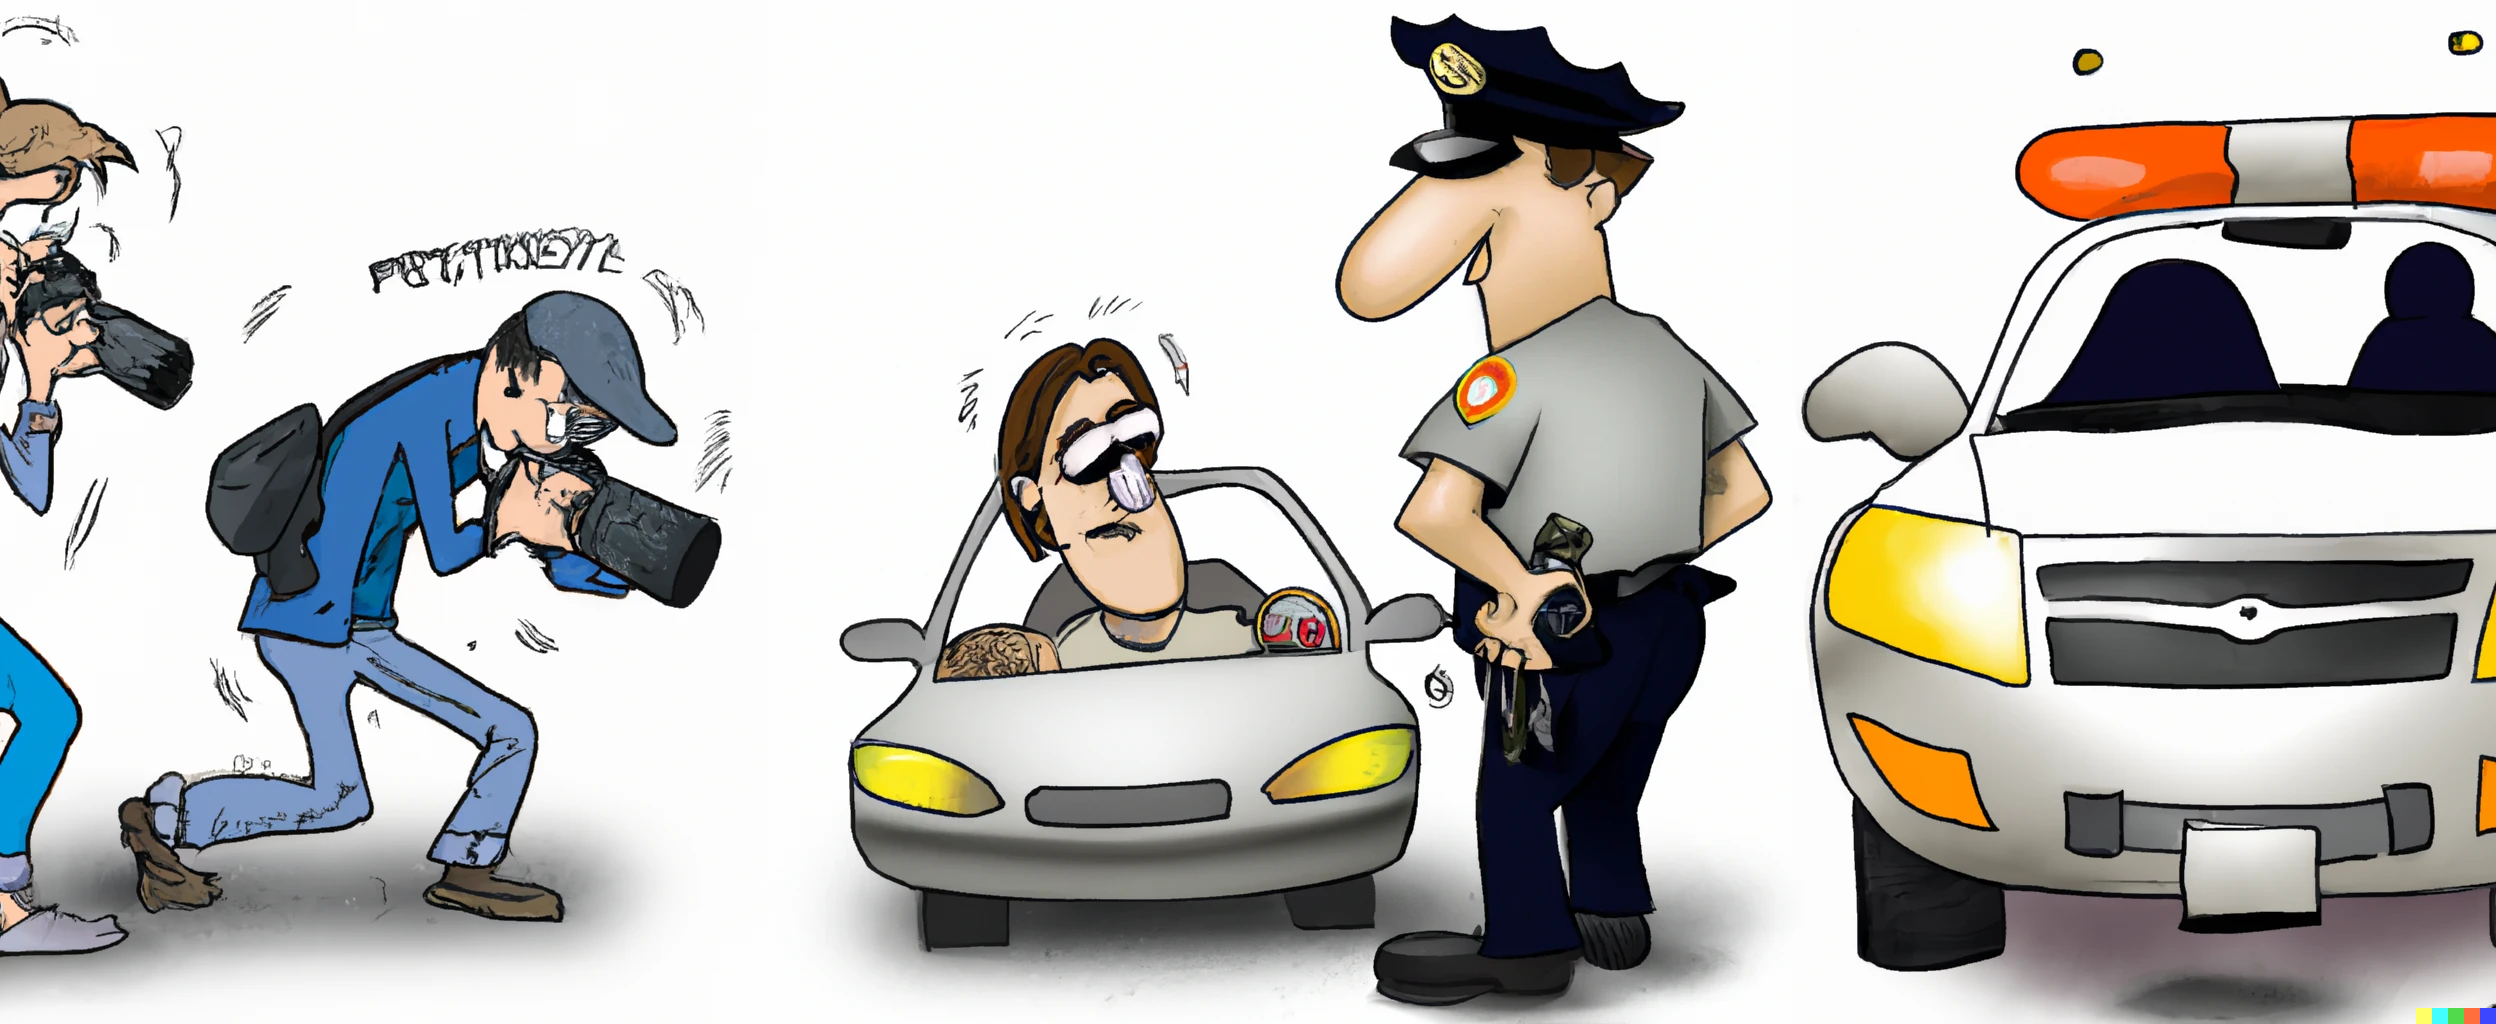 caricature of driver pulled over by police for drug testing an paparazzi taking photos